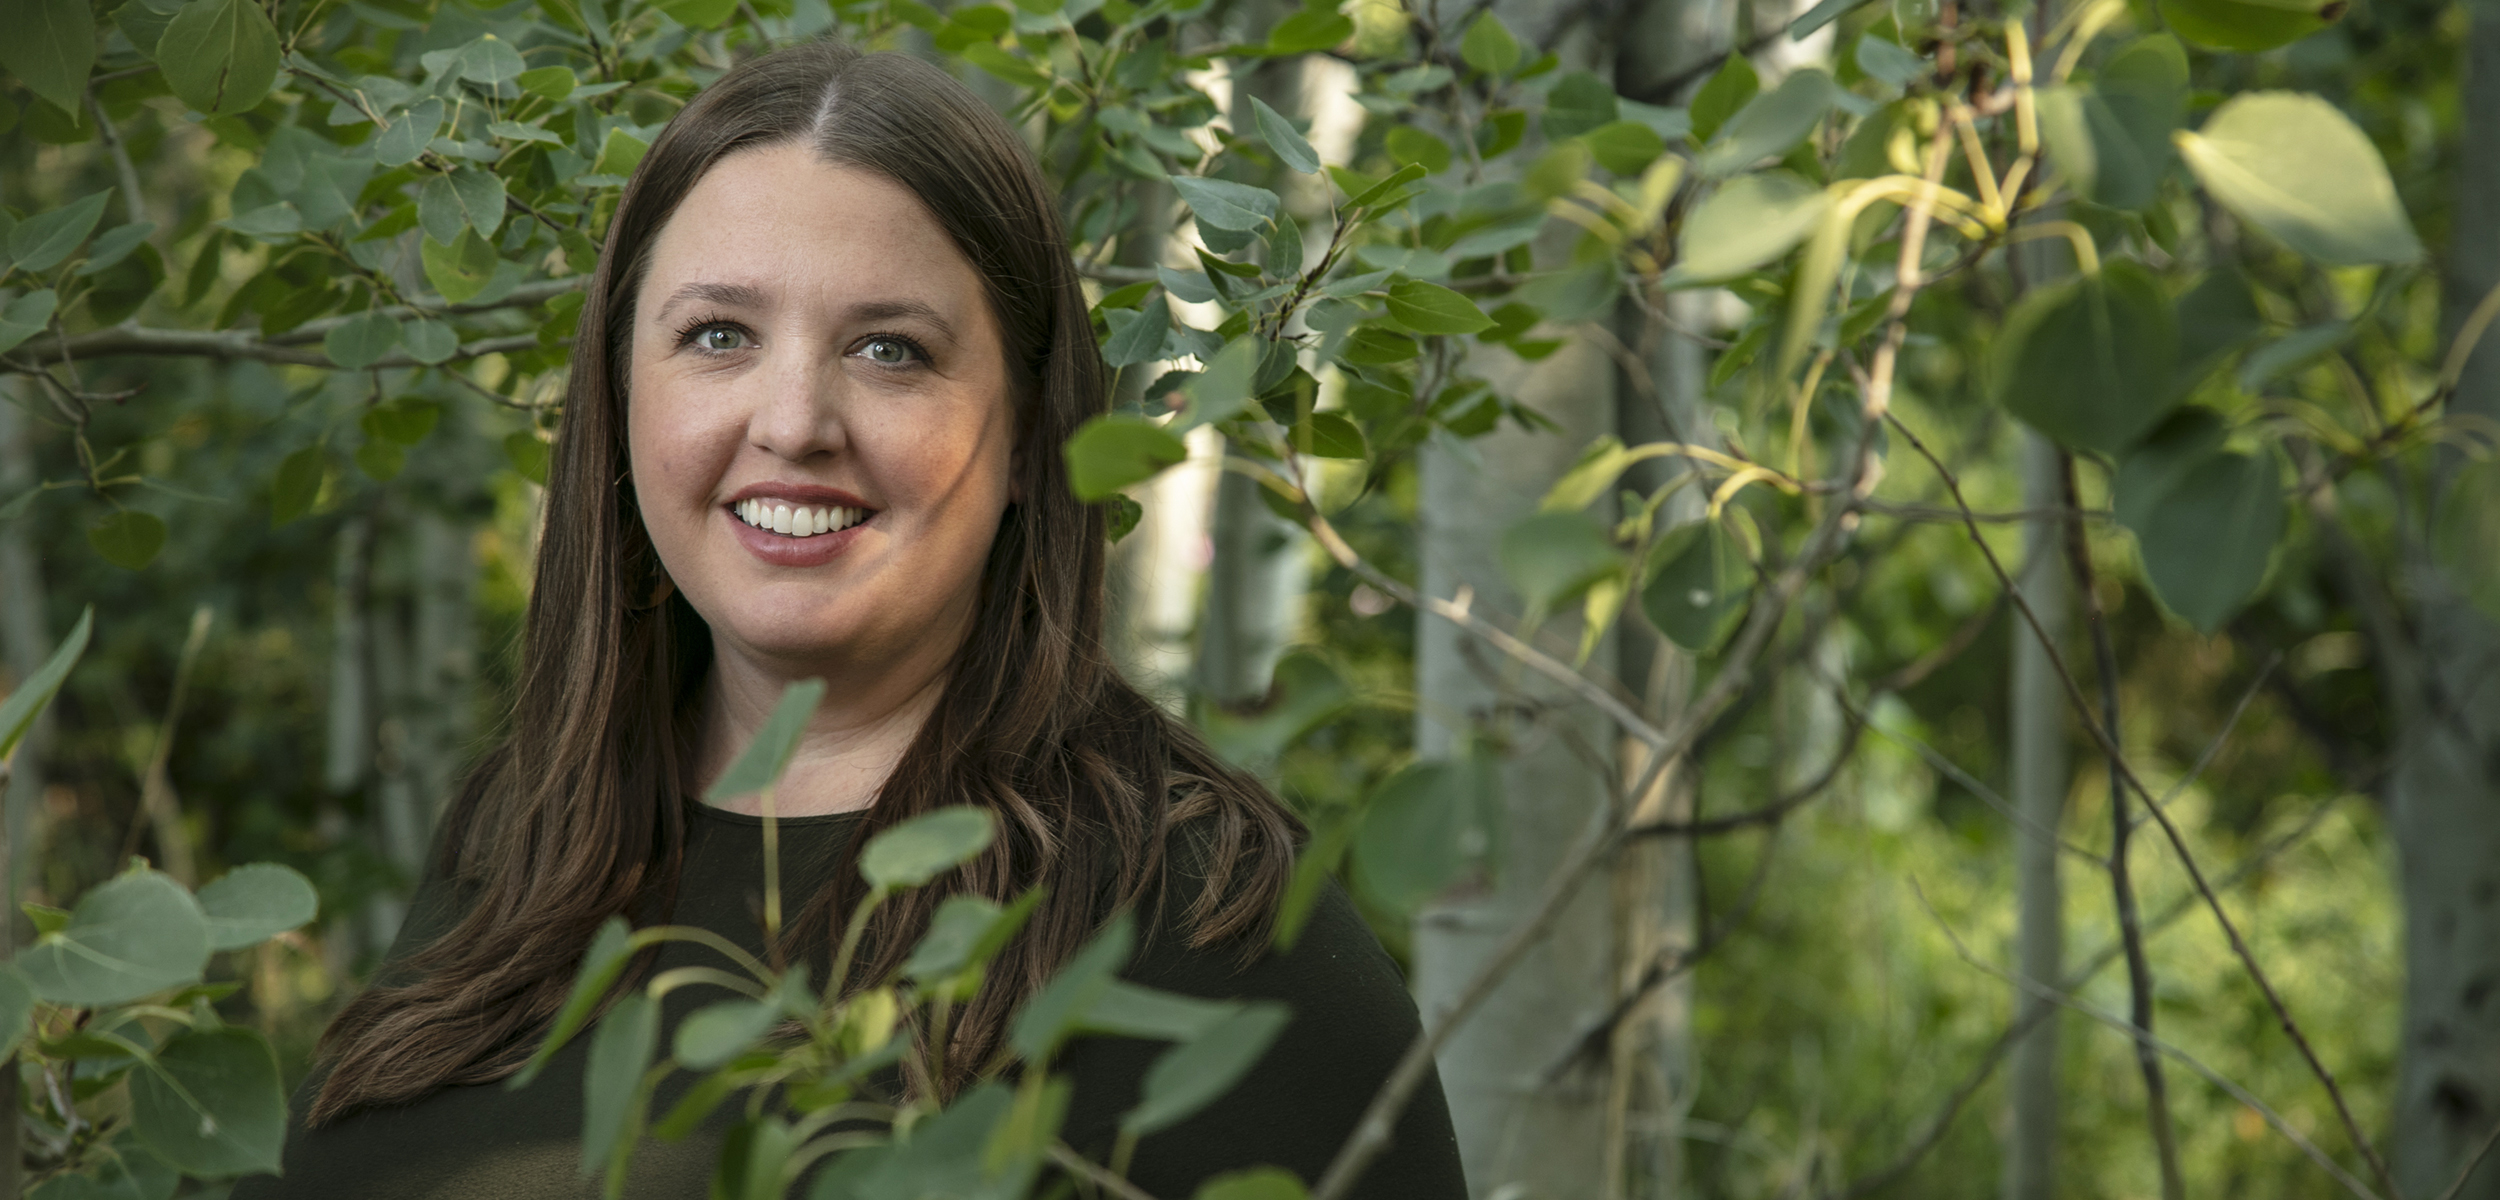 CWU’s Sustainability Report Card: A Q&A with Kathleen Klaniecki